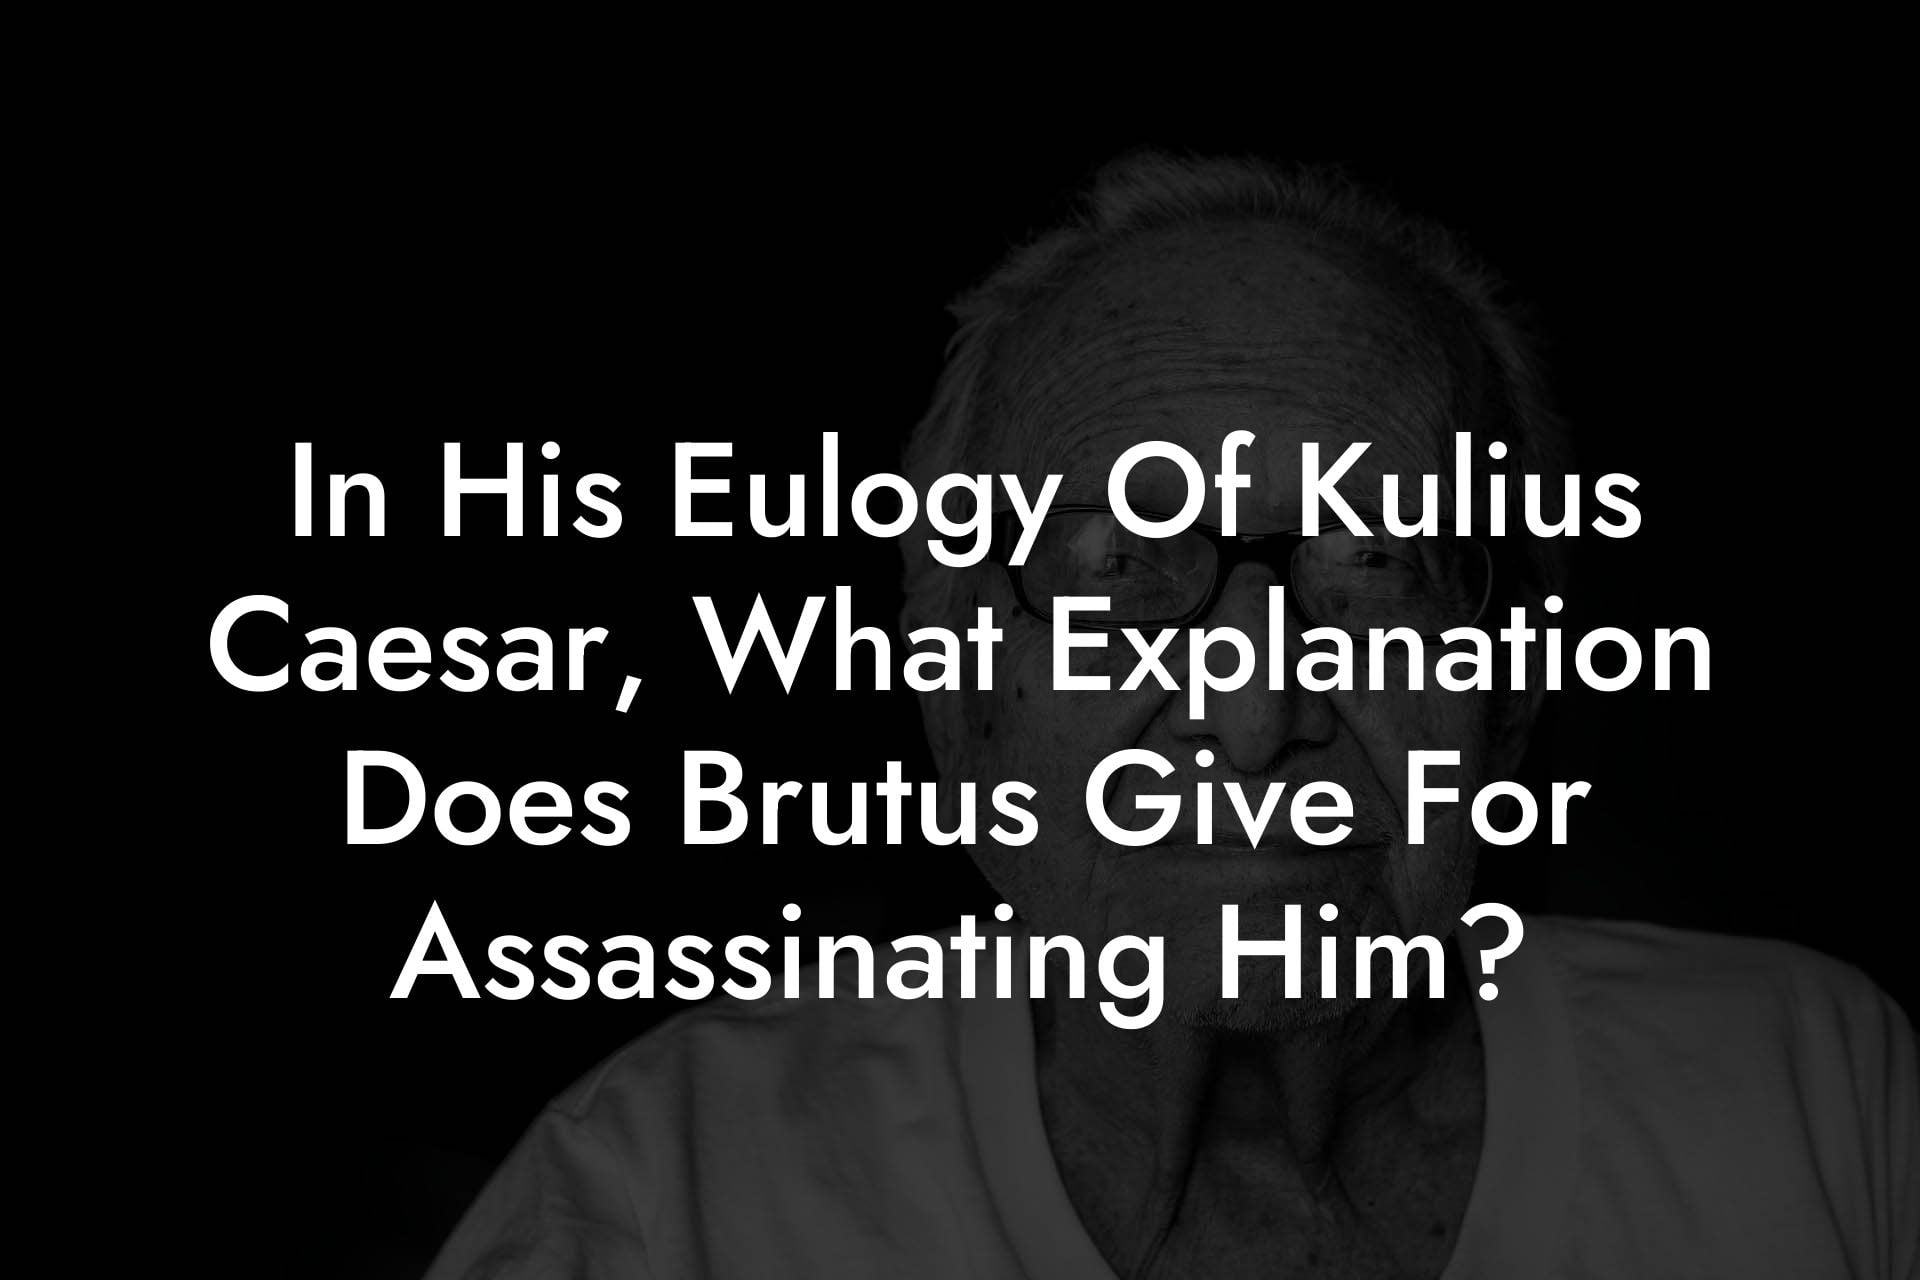 In His Eulogy Of Kulius Caesar, What Explanation Does Brutus Give For Assassinating Him?